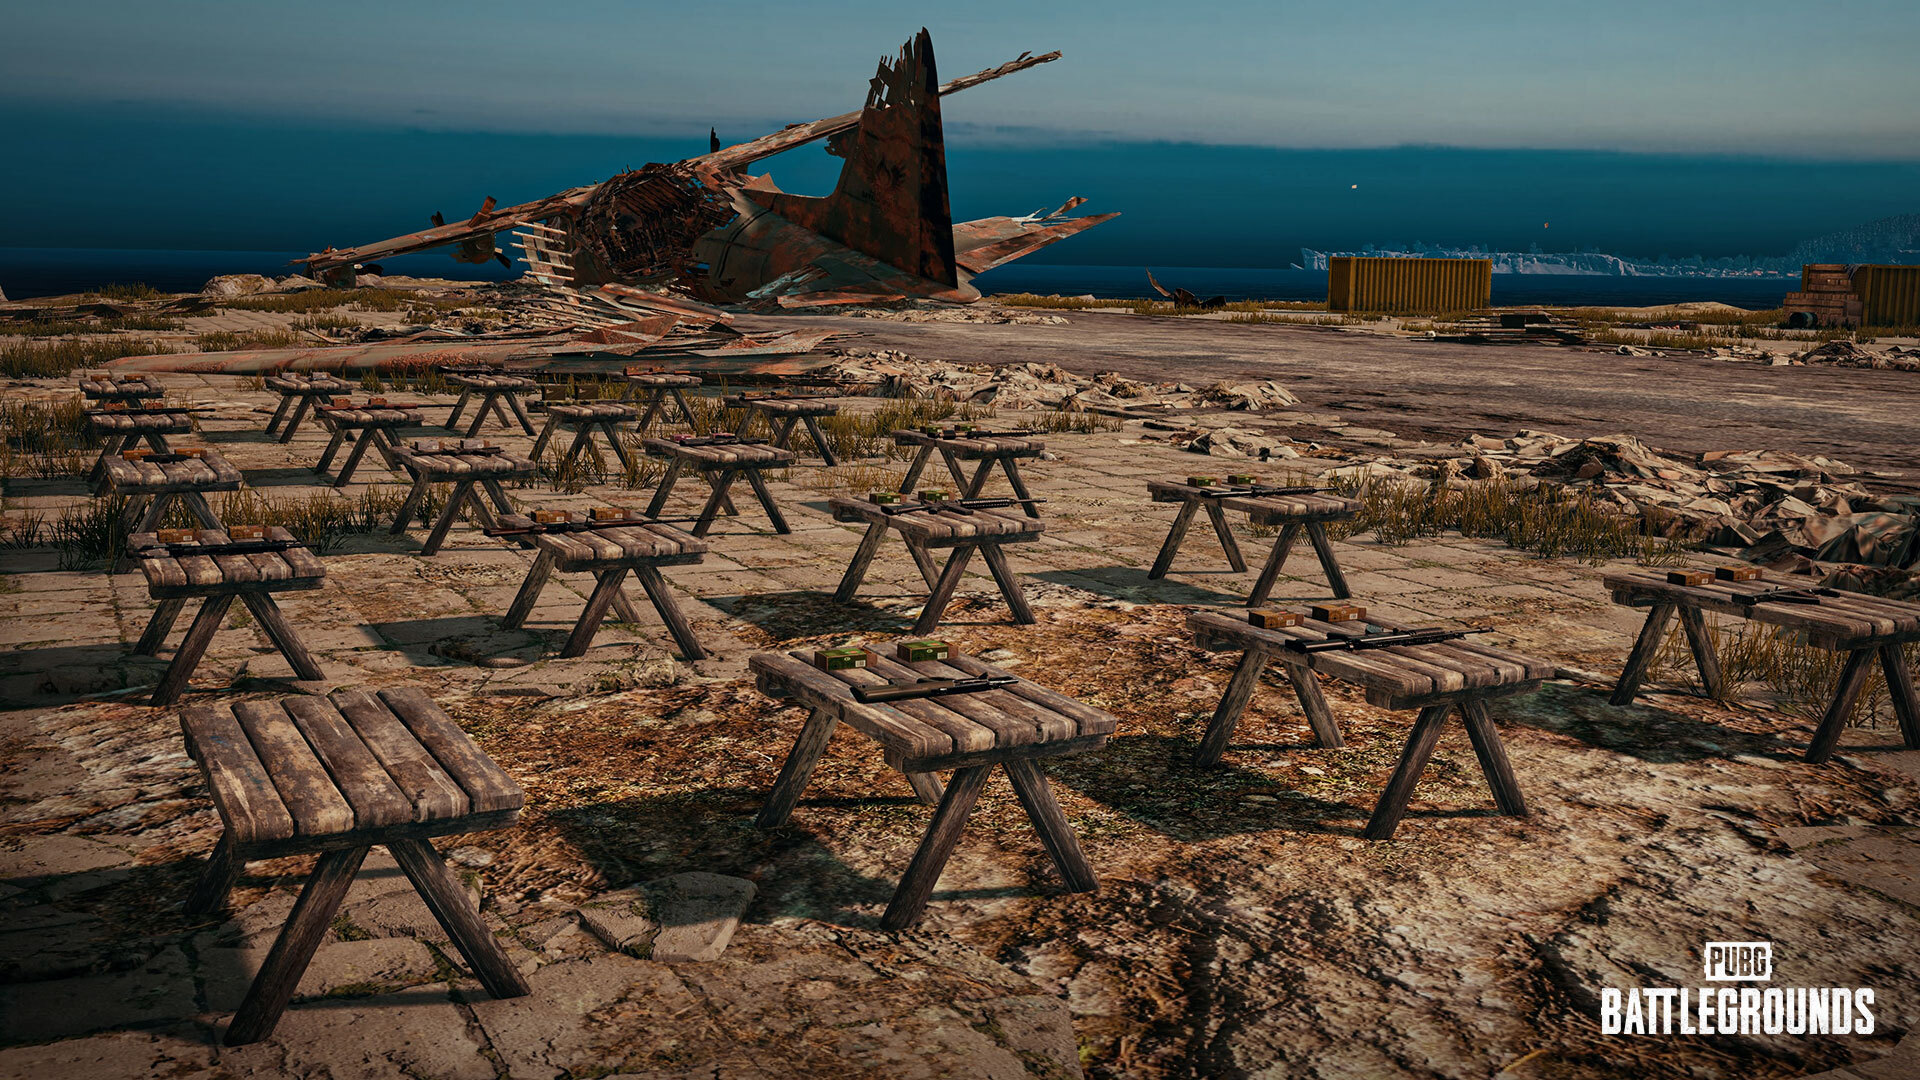 image of weapons arrayed on a grid of picnic benches in PUBG Battlegrounds. A crashed airplane's wreckage is in the distance.